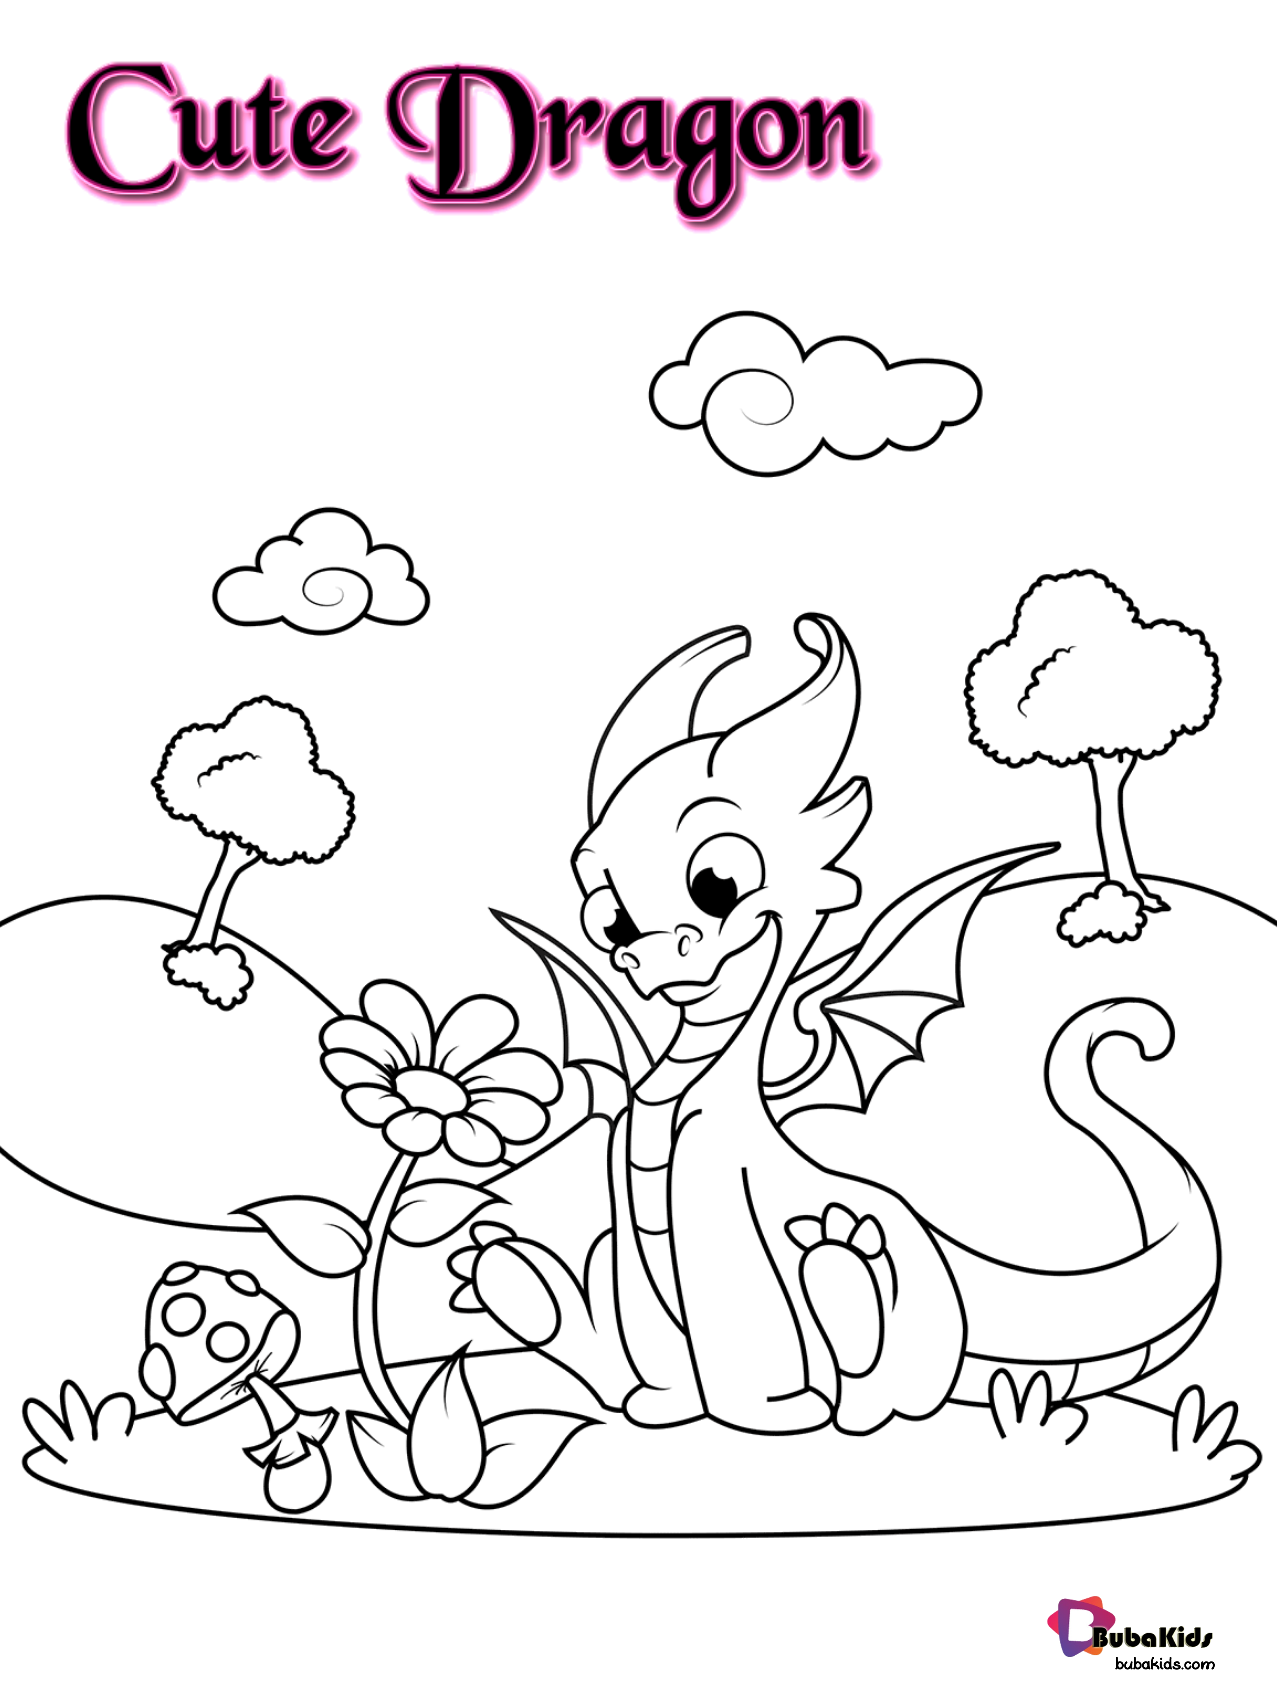 Free and printable cute dragon and flower coloring page Wallpaper